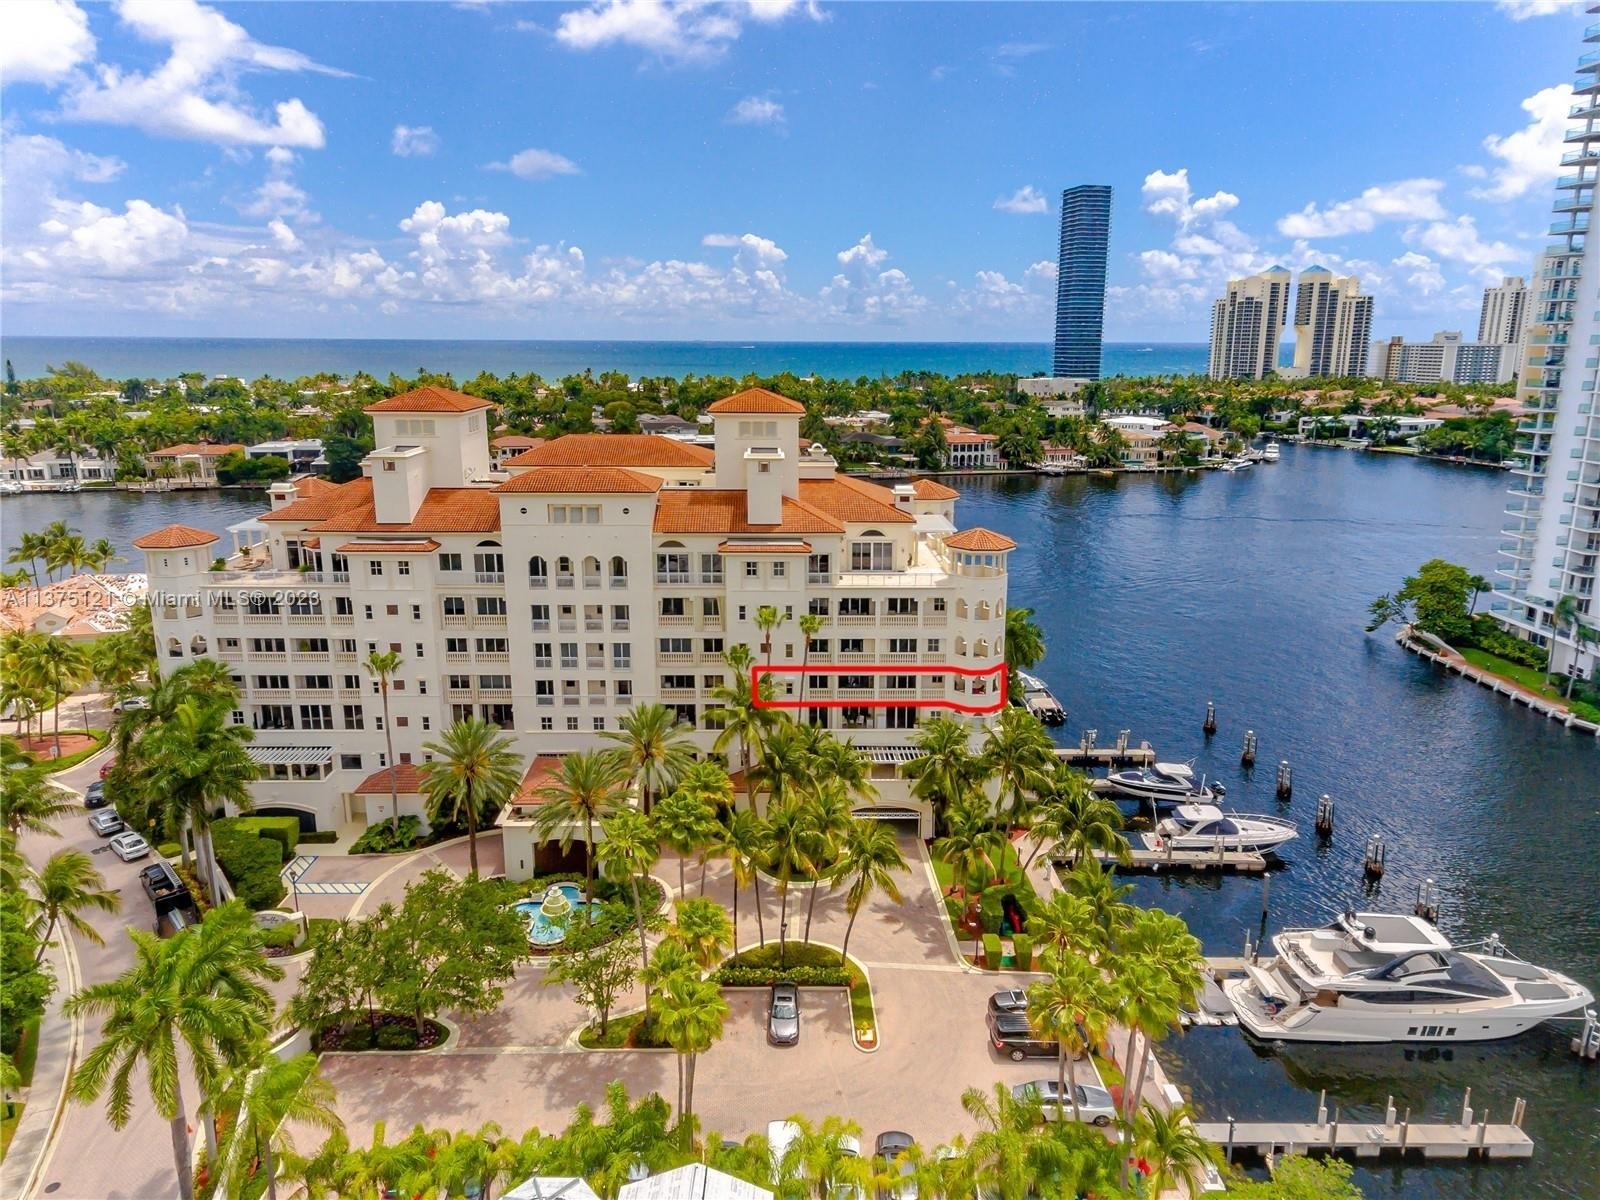 Condominium for Sale at 19925 NE 39th Pl, 404 Biscayne Yacht and Country Club, Aventura, FL 33180